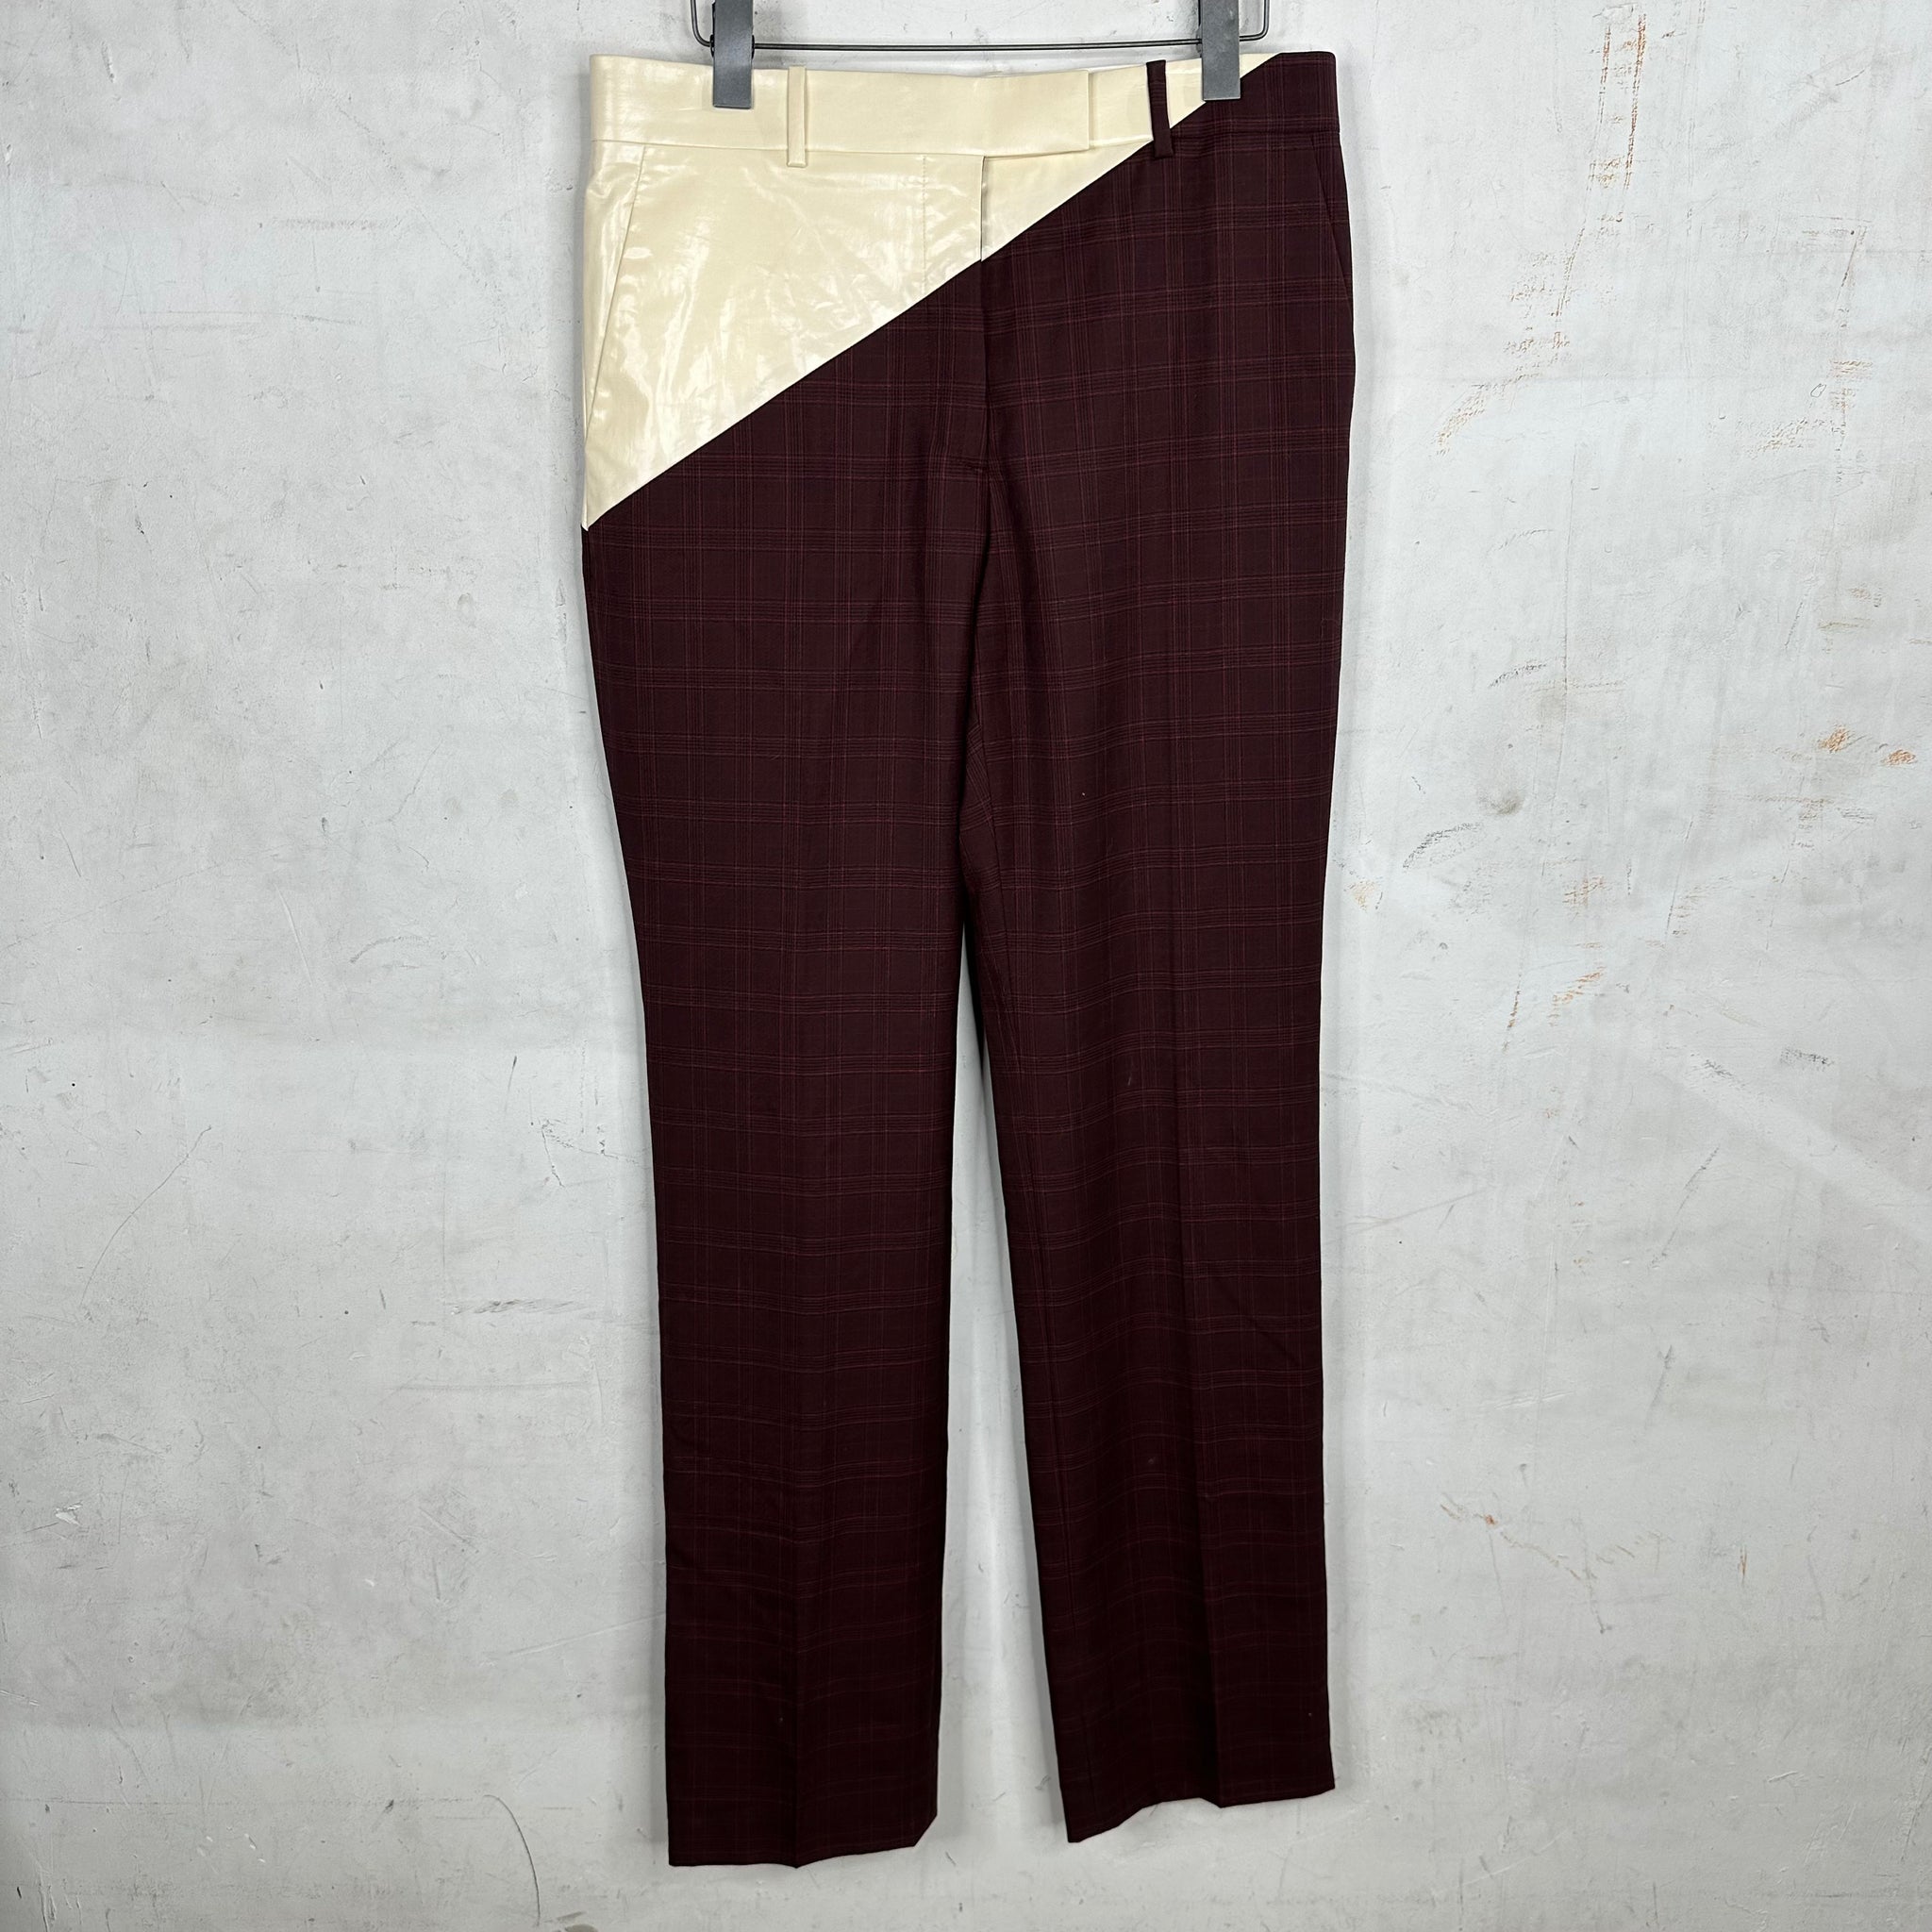 Calvin Klein 205W39NYC Reconstructed Dress Trousers